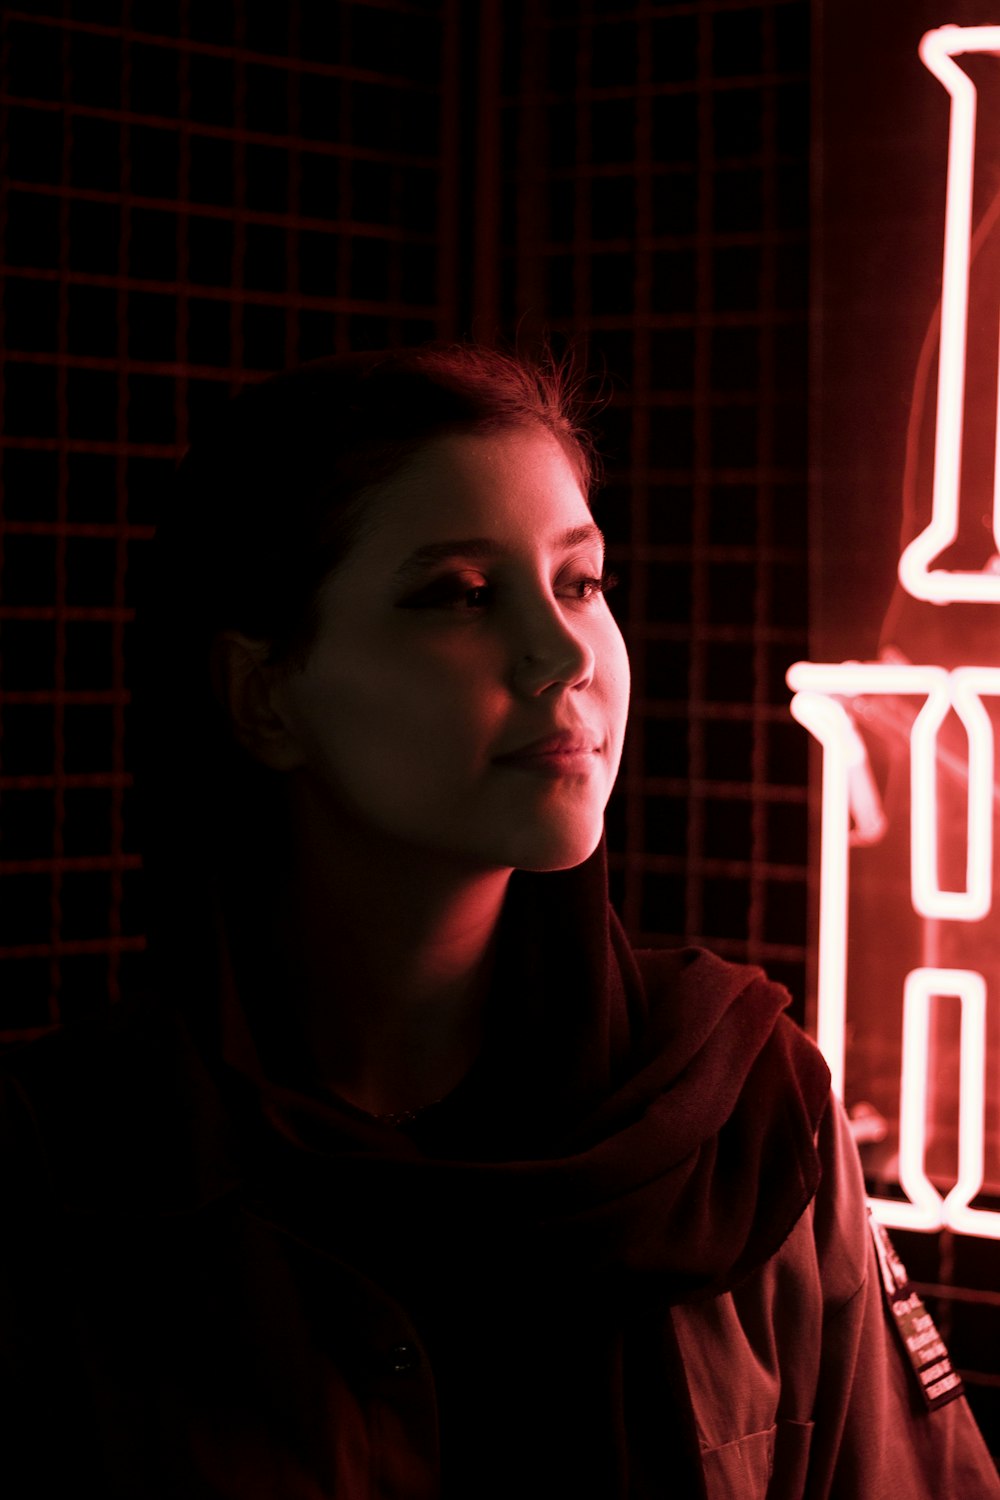 woman in brown hoodie standing near neon light signage